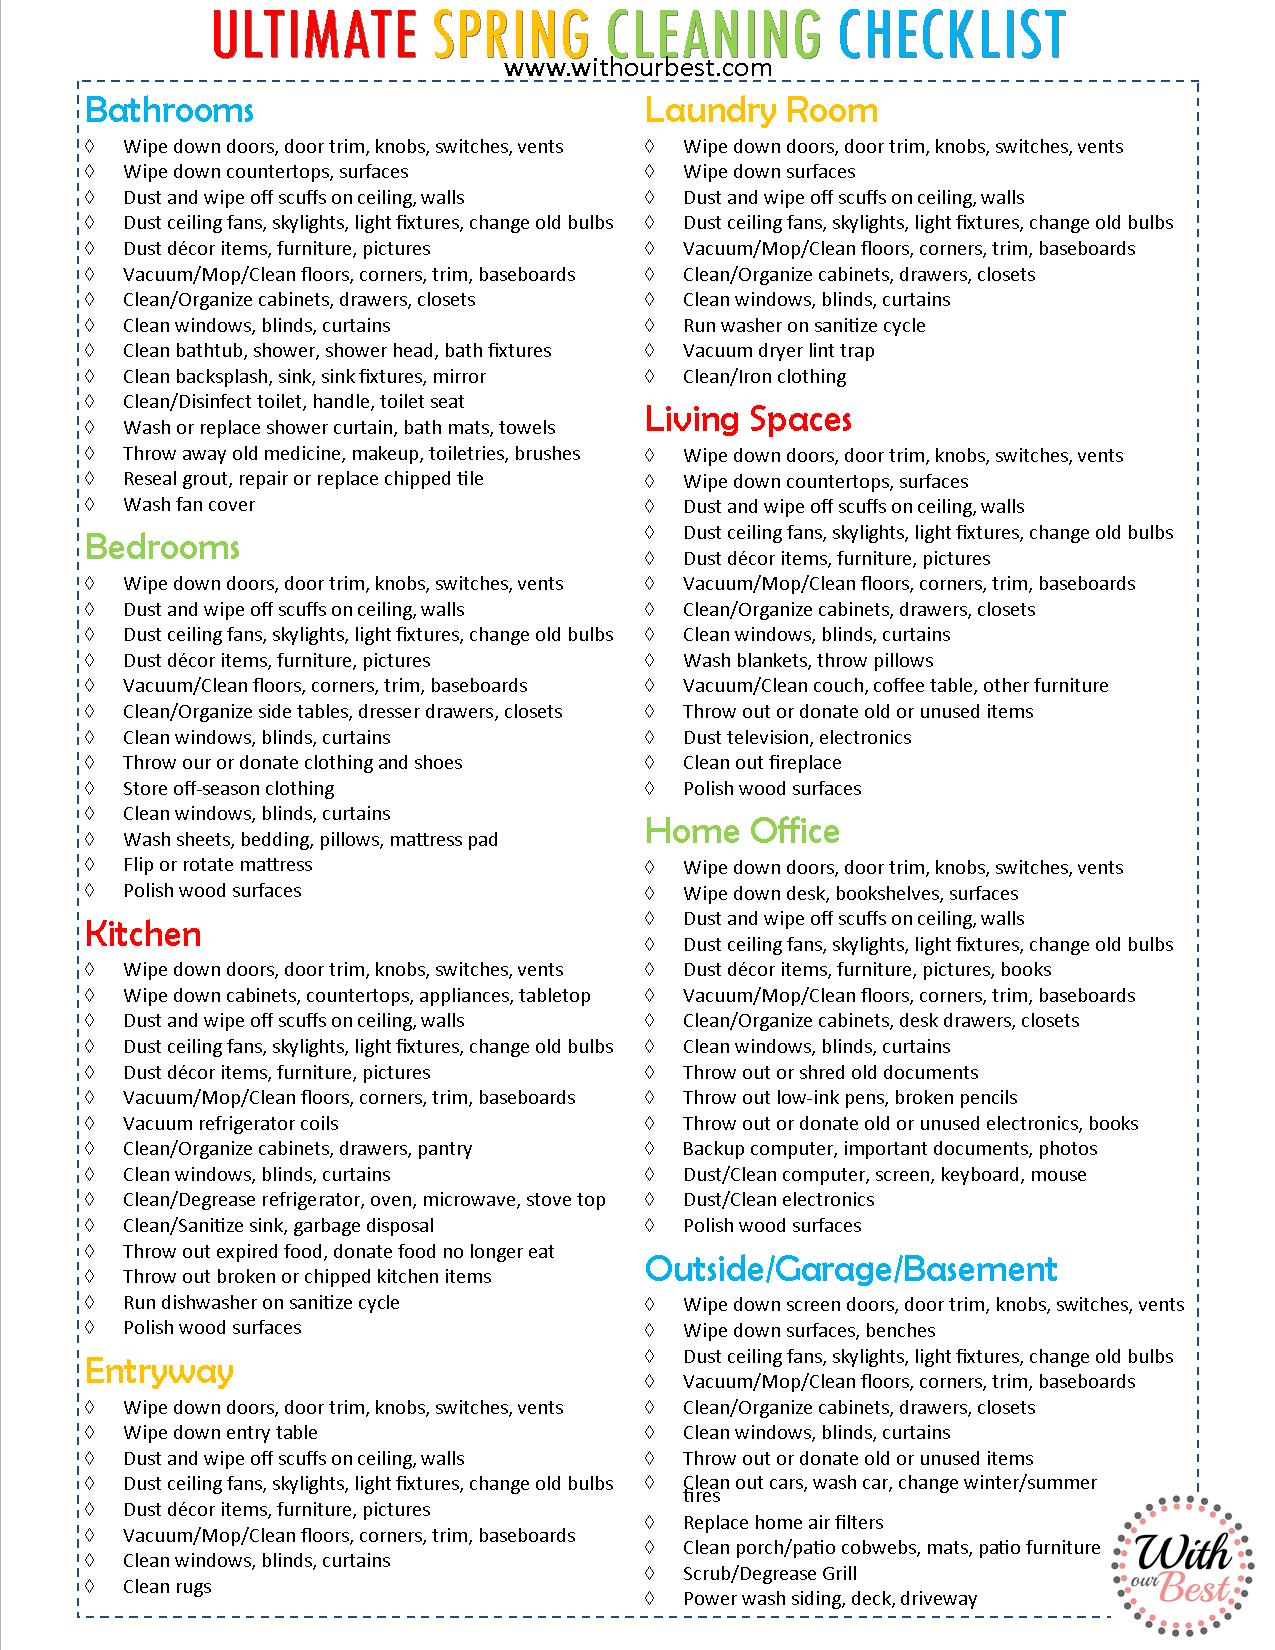 outdoor spring cleaning checklist